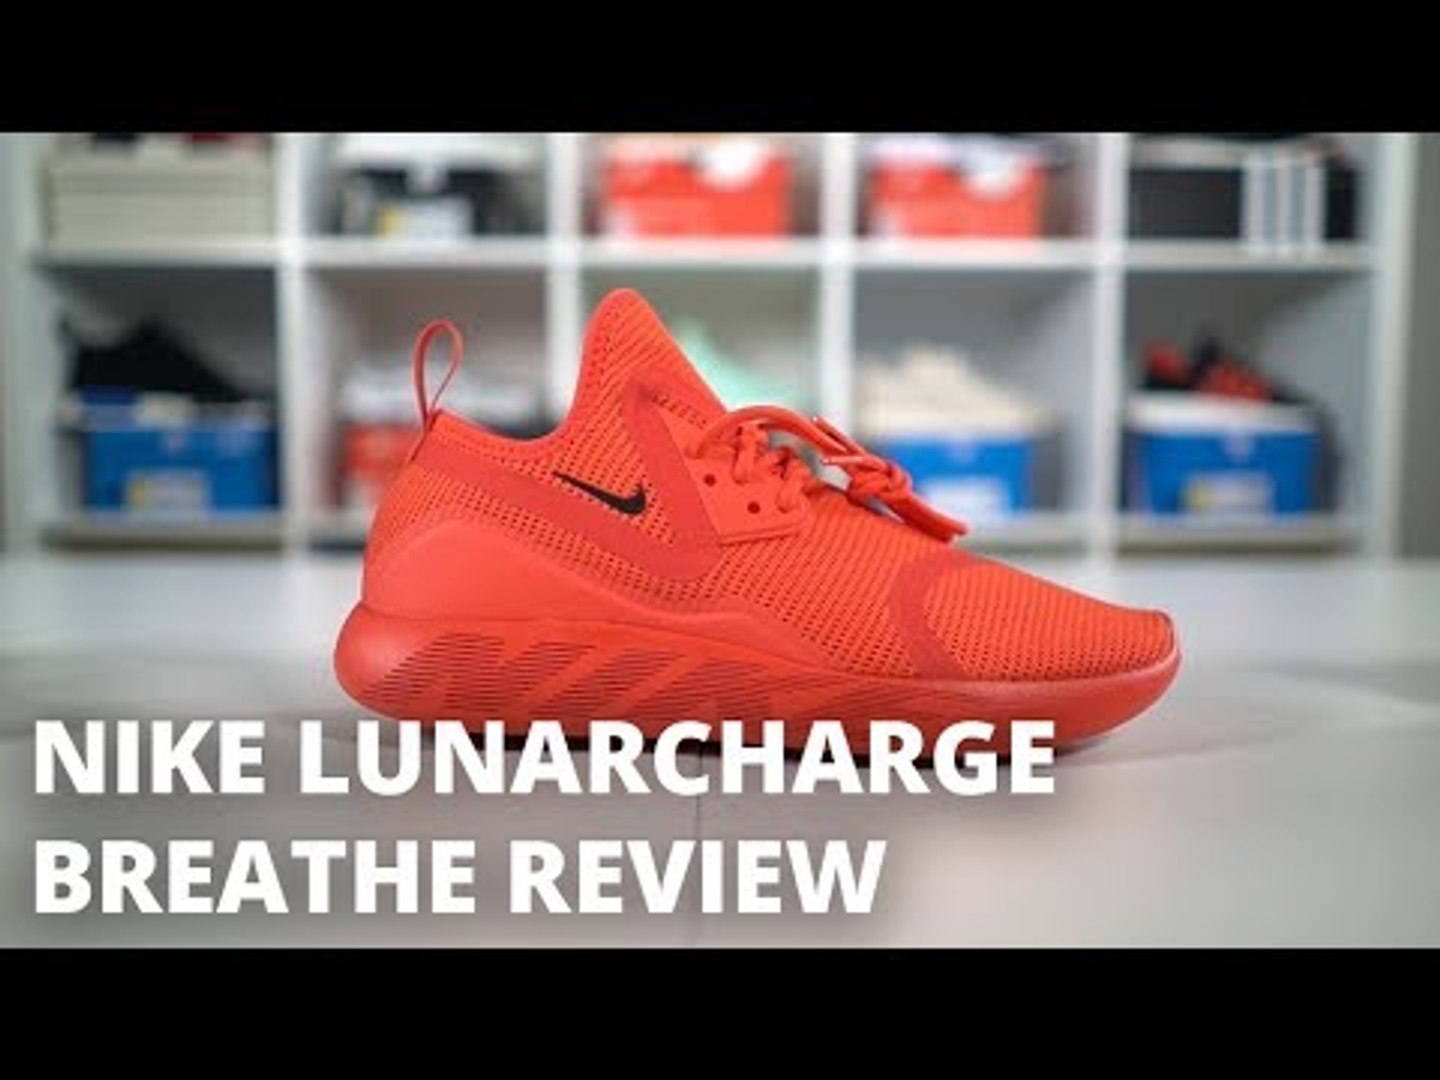 Nike LunarCharge Breathe Review - video Dailymotion